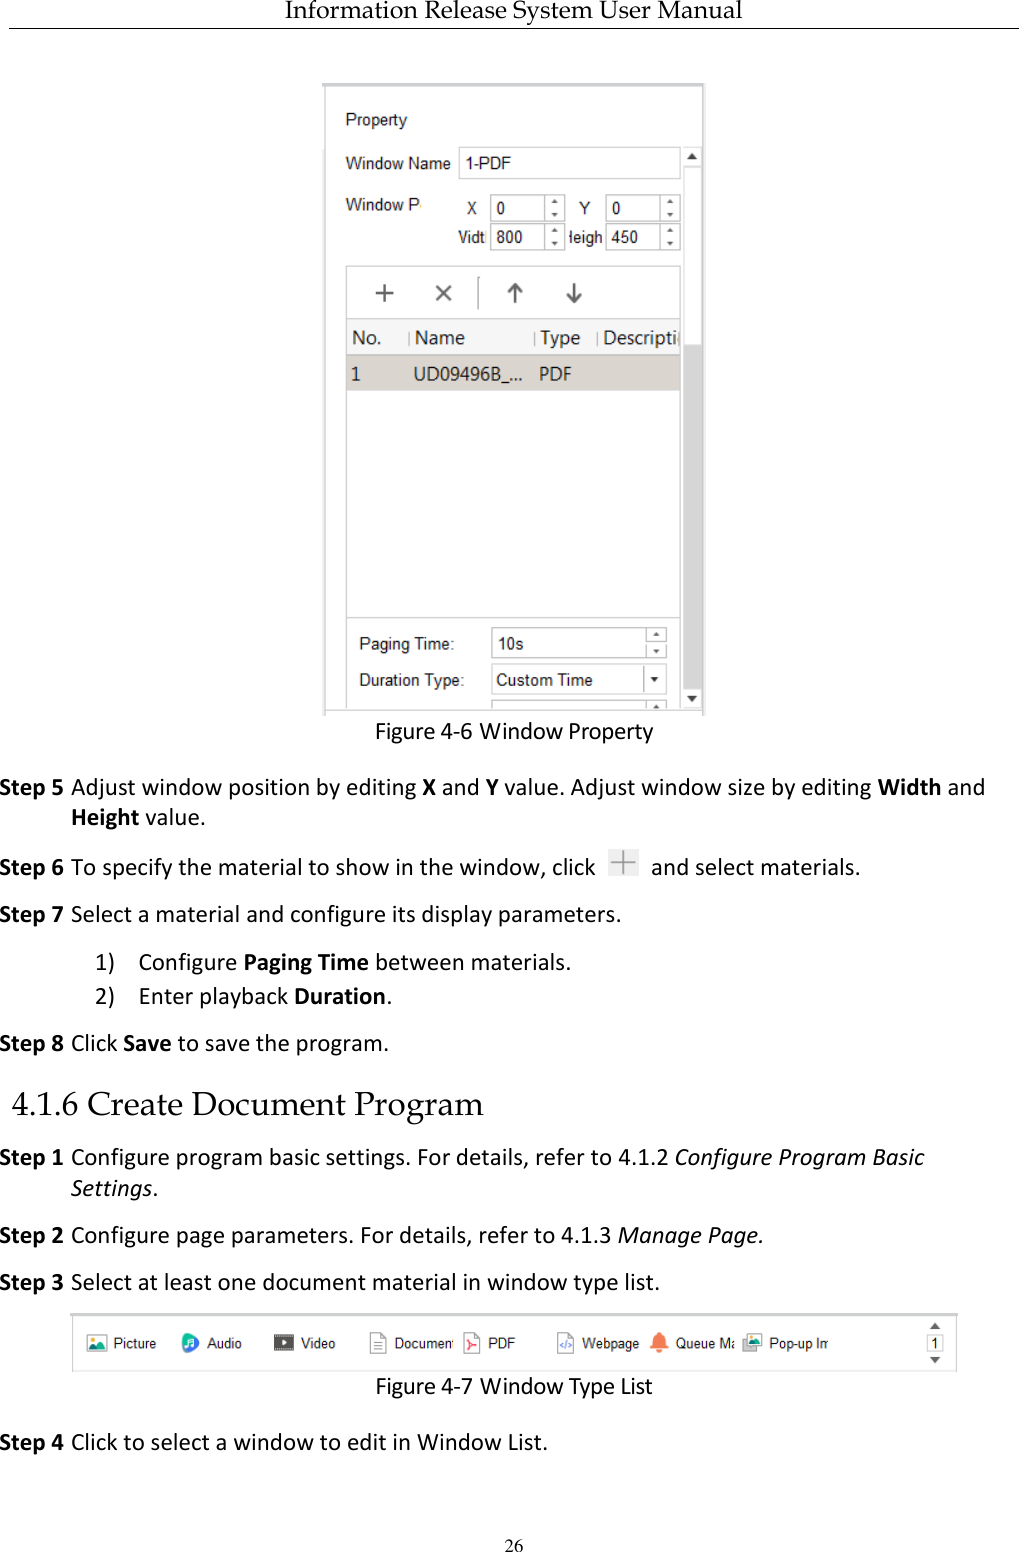 Information Release System User Manual 26  Figure 4-6 Window Property Step 5 Adjust window position by editing X and Y value. Adjust window size by editing Width and Height value. Step 6 To specify the material to show in the window, click    and select materials. Step 7 Select a material and configure its display parameters. 1) Configure Paging Time between materials. 2) Enter playback Duration.   Step 8 Click Save to save the program. 4.1.6 Create Document Program Step 1 Configure program basic settings. For details, refer to 4.1.2 Configure Program Basic Settings. Step 2 Configure page parameters. For details, refer to 4.1.3 Manage Page. Step 3 Select at least one document material in window type list.  Figure 4-7 Window Type List Step 4 Click to select a window to edit in Window List. 